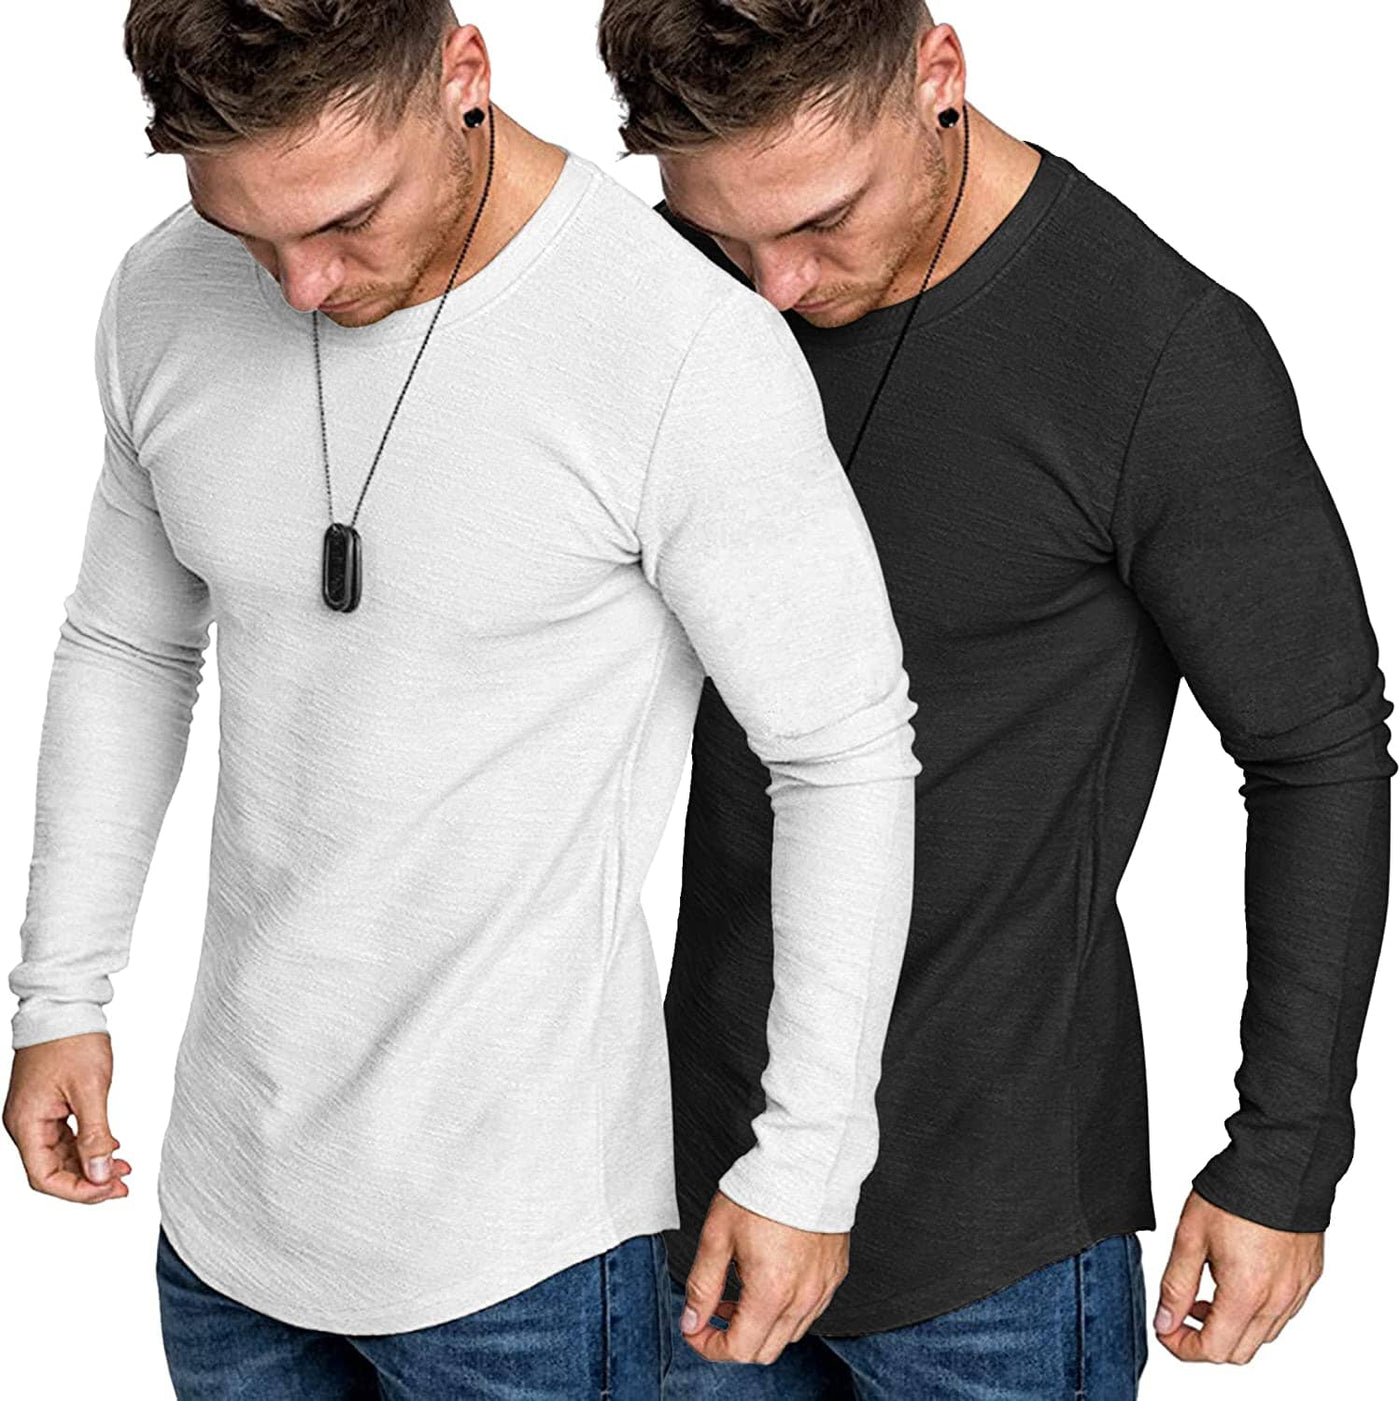 2-Pack Muscle Fitted Workout T-Shirt (US Only) T-Shirt COOFANDY Store Black/White S 